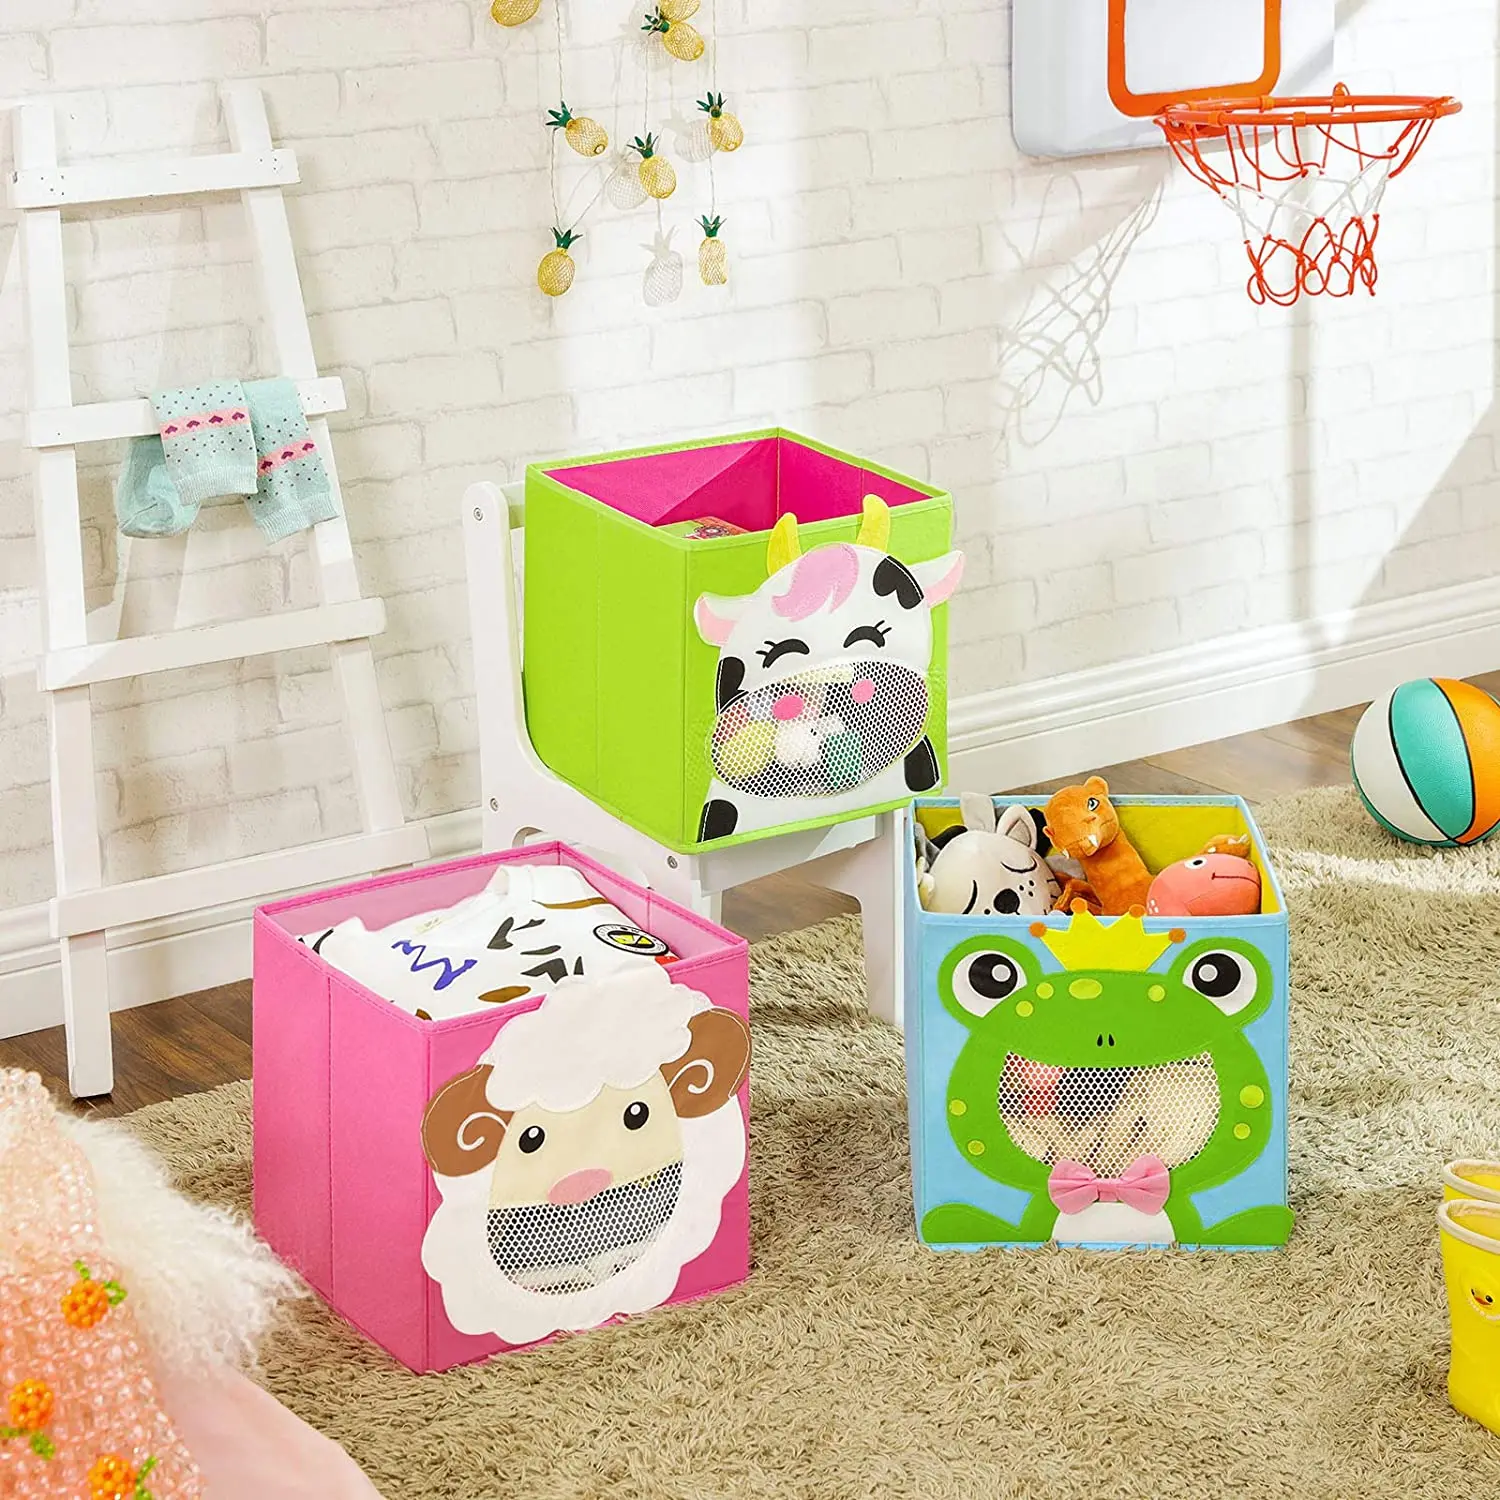 

Storage X Room Toy Kid’s Boxes For Cubes Bins Cm Organisers X Foldable Storage 27 Folding 27 Playroom 27